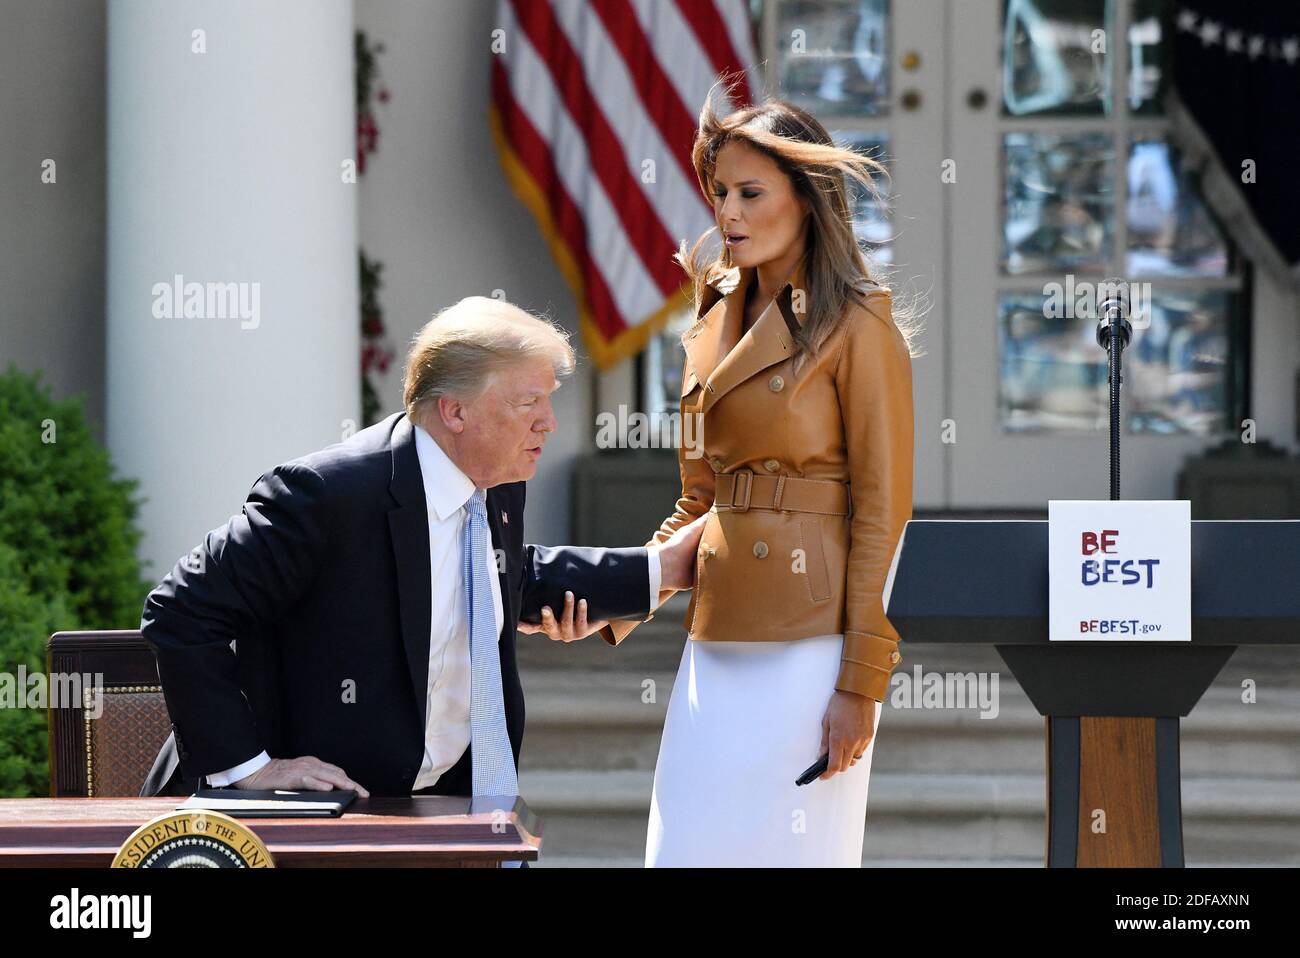 File photo - U.S. President Donald Trump attends the Launch of First Lady Melania TrumpâÂÂ€ÂÂ™s Initiatives on May 7, 2018 in the Rose Garden of the White House in Washington, DC. A new, scrupulously reported biography by Washington Post reporter Mary Jordan argues that the first lady is not a pawn but a player, an accessory in the second as much as the first sense, and a woman able to get what she wants from one of the most powerful and transparently vain men in the world. The book is called The Art of Her Deal. Photo by Olivier Douliery/ Abaca Press Stock Photo